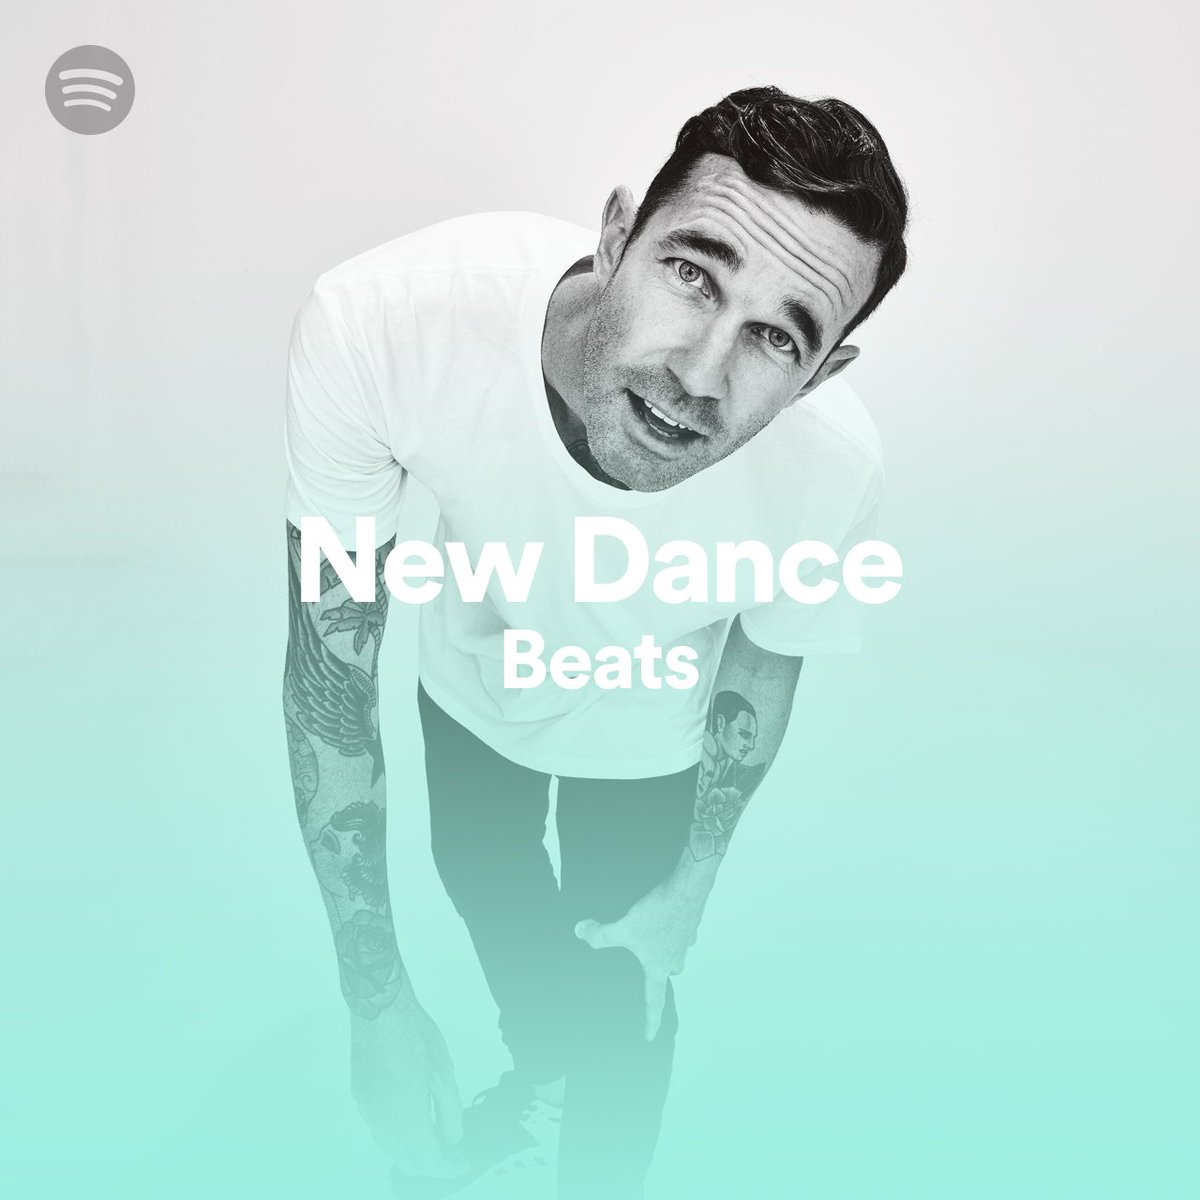 Ya boi @PacesMusic is the face of #NewDanceBeats on @SpotifyAU ✊✊ tune in there or #NewMusicFriday to hear his new banger #GoingMad feat. @clypsoishere & @RavenFelix 💥

Going Mad is out now - paces.lnk.to/GoingMadTW 🔊